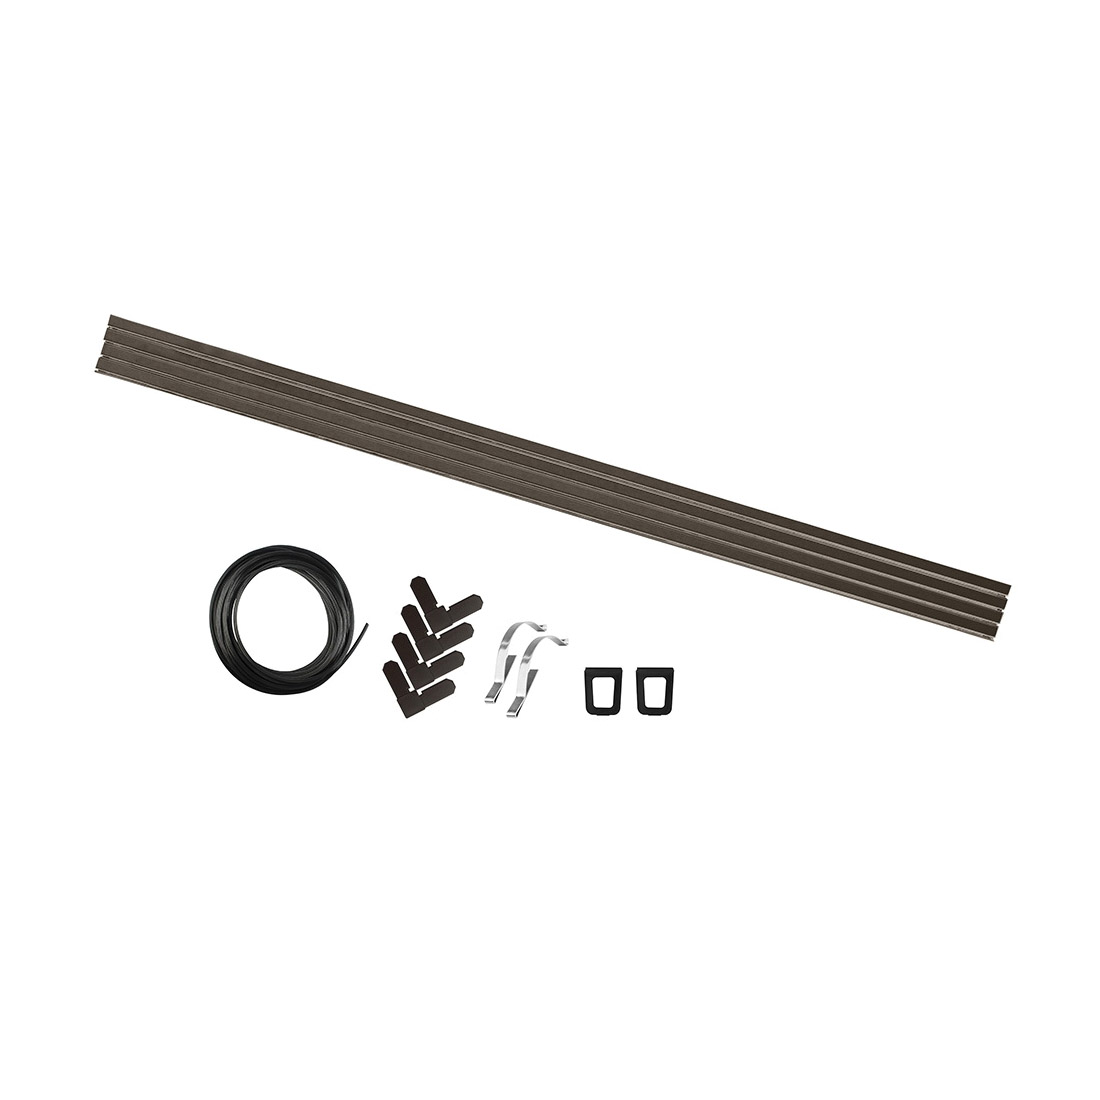 M-D 14106 Screen Replacement Kit, Aluminum, Bronze, For: 5/16 in Frames